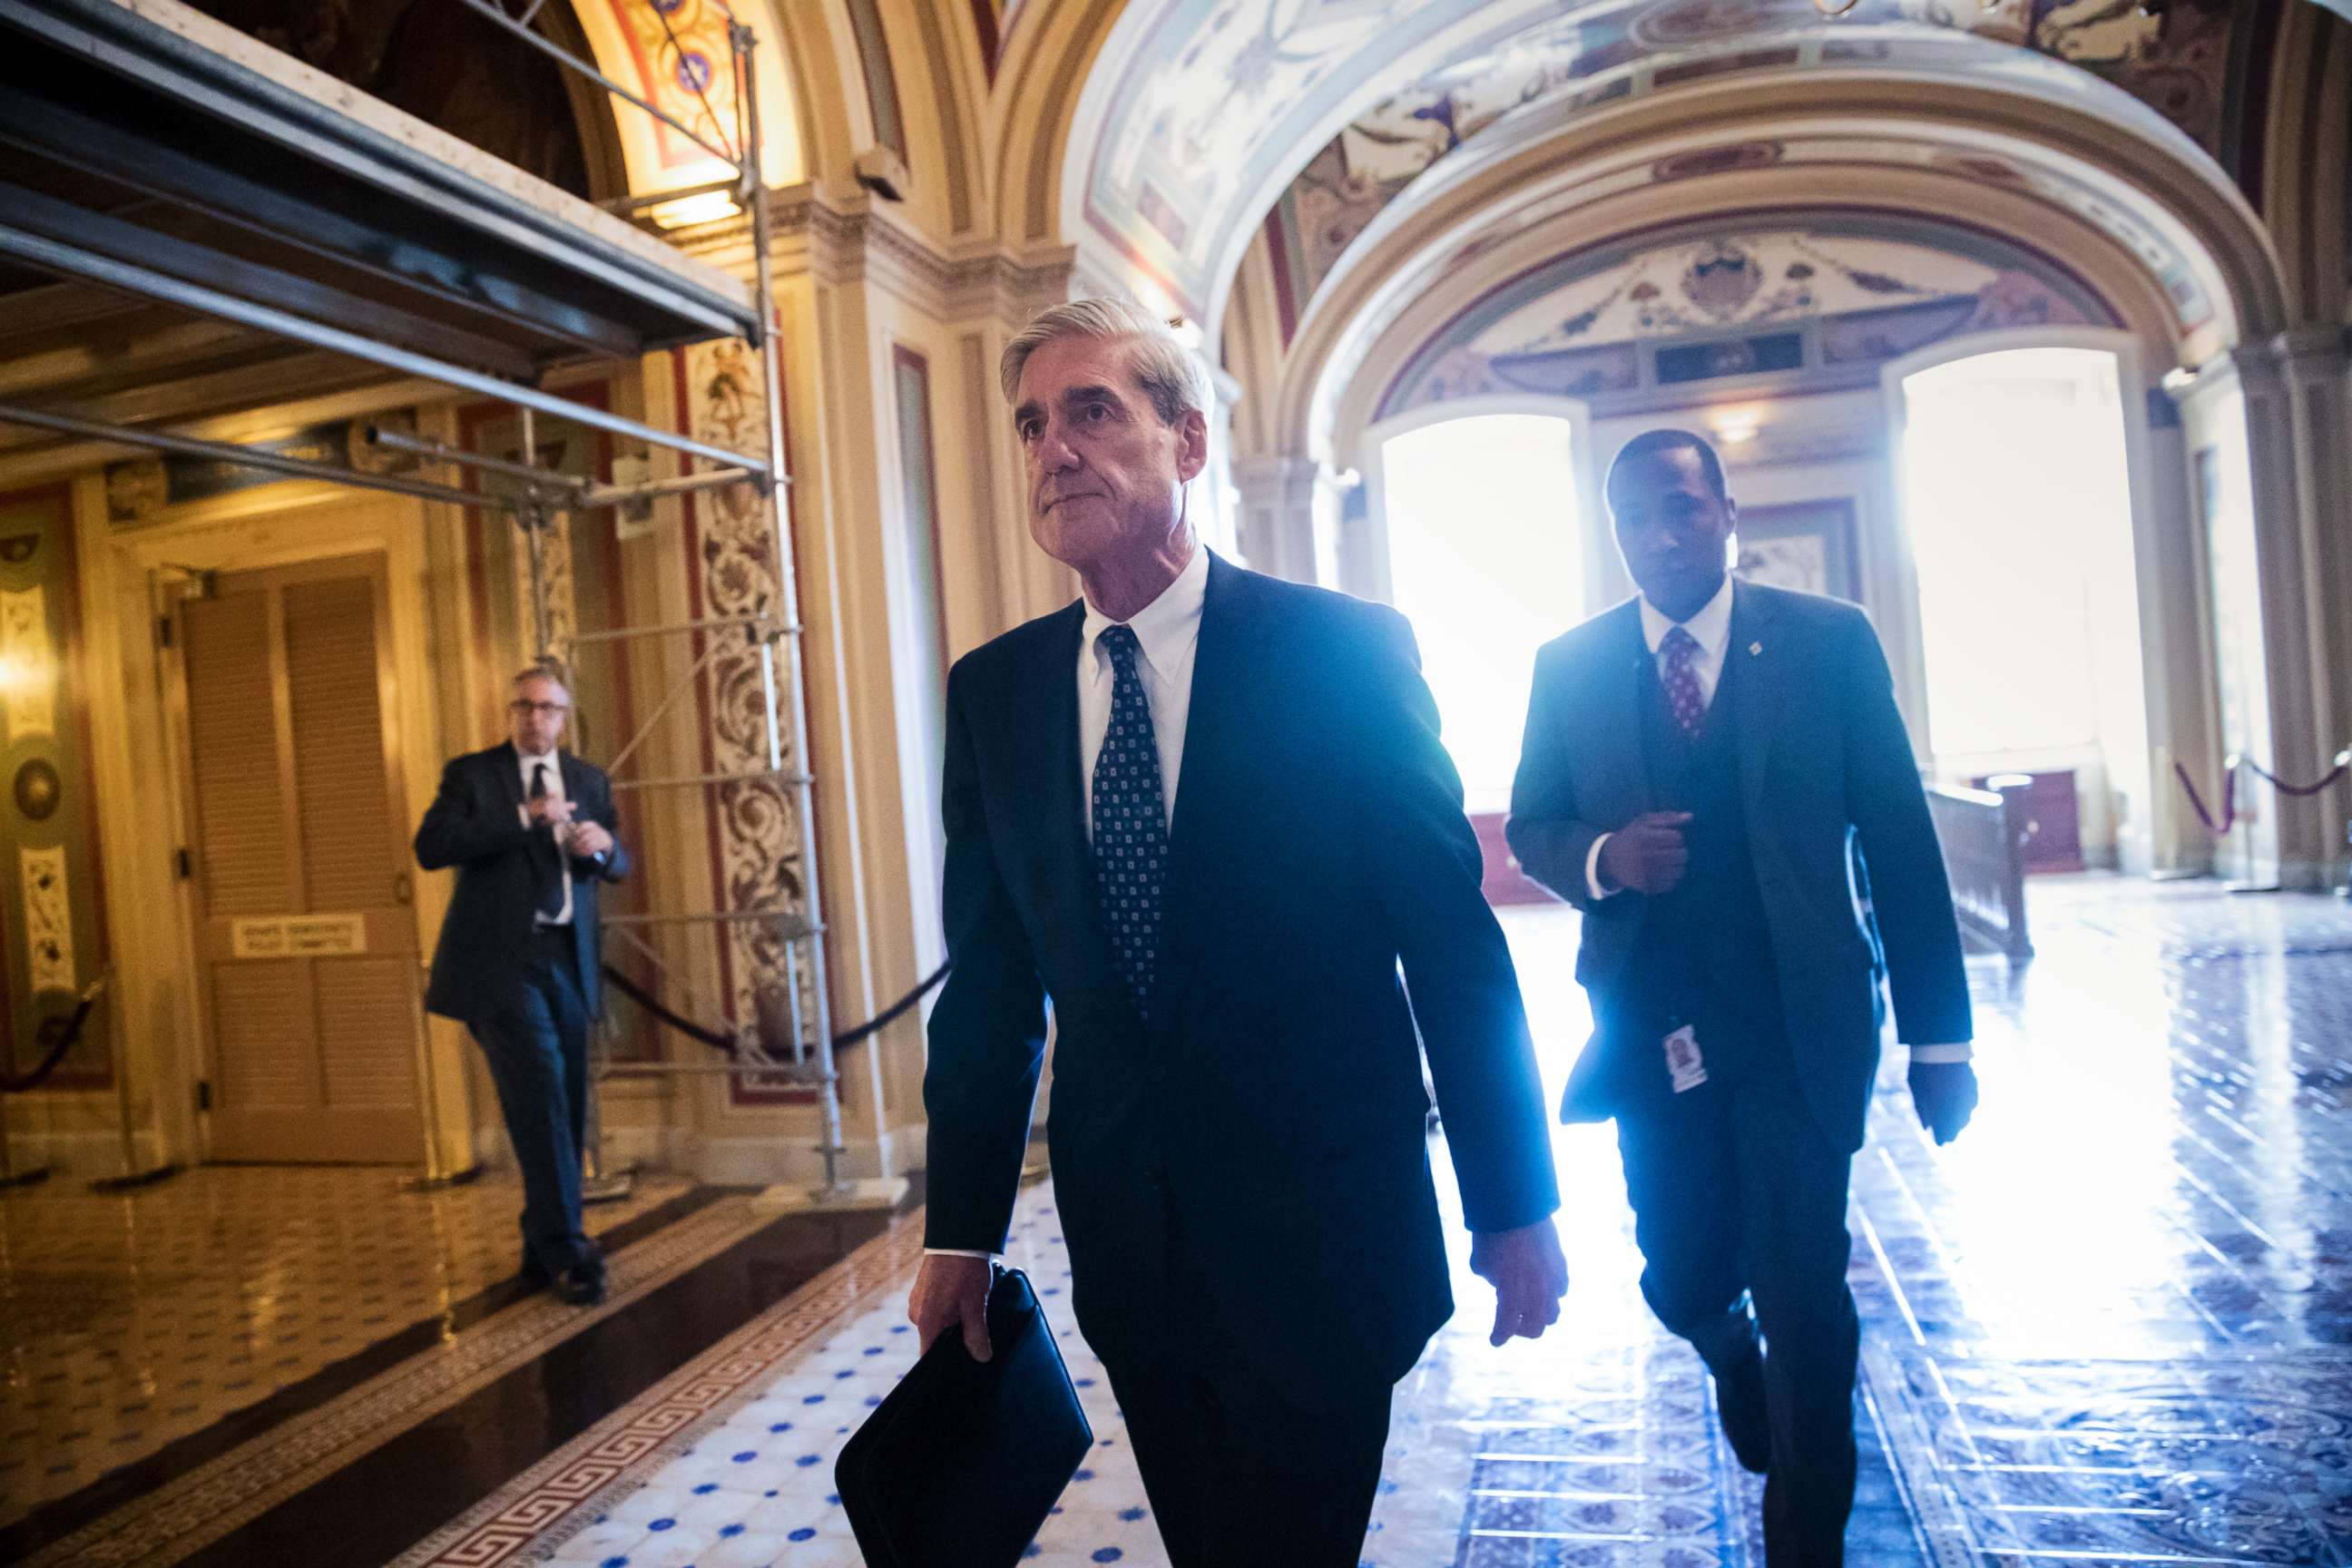 PHOTO: In this Wednesday, June 21, 2017 file photo, Special Counsel Robert Mueller departs the Capitol after a closed-door meeting with members of the Senate Judiciary Committee.